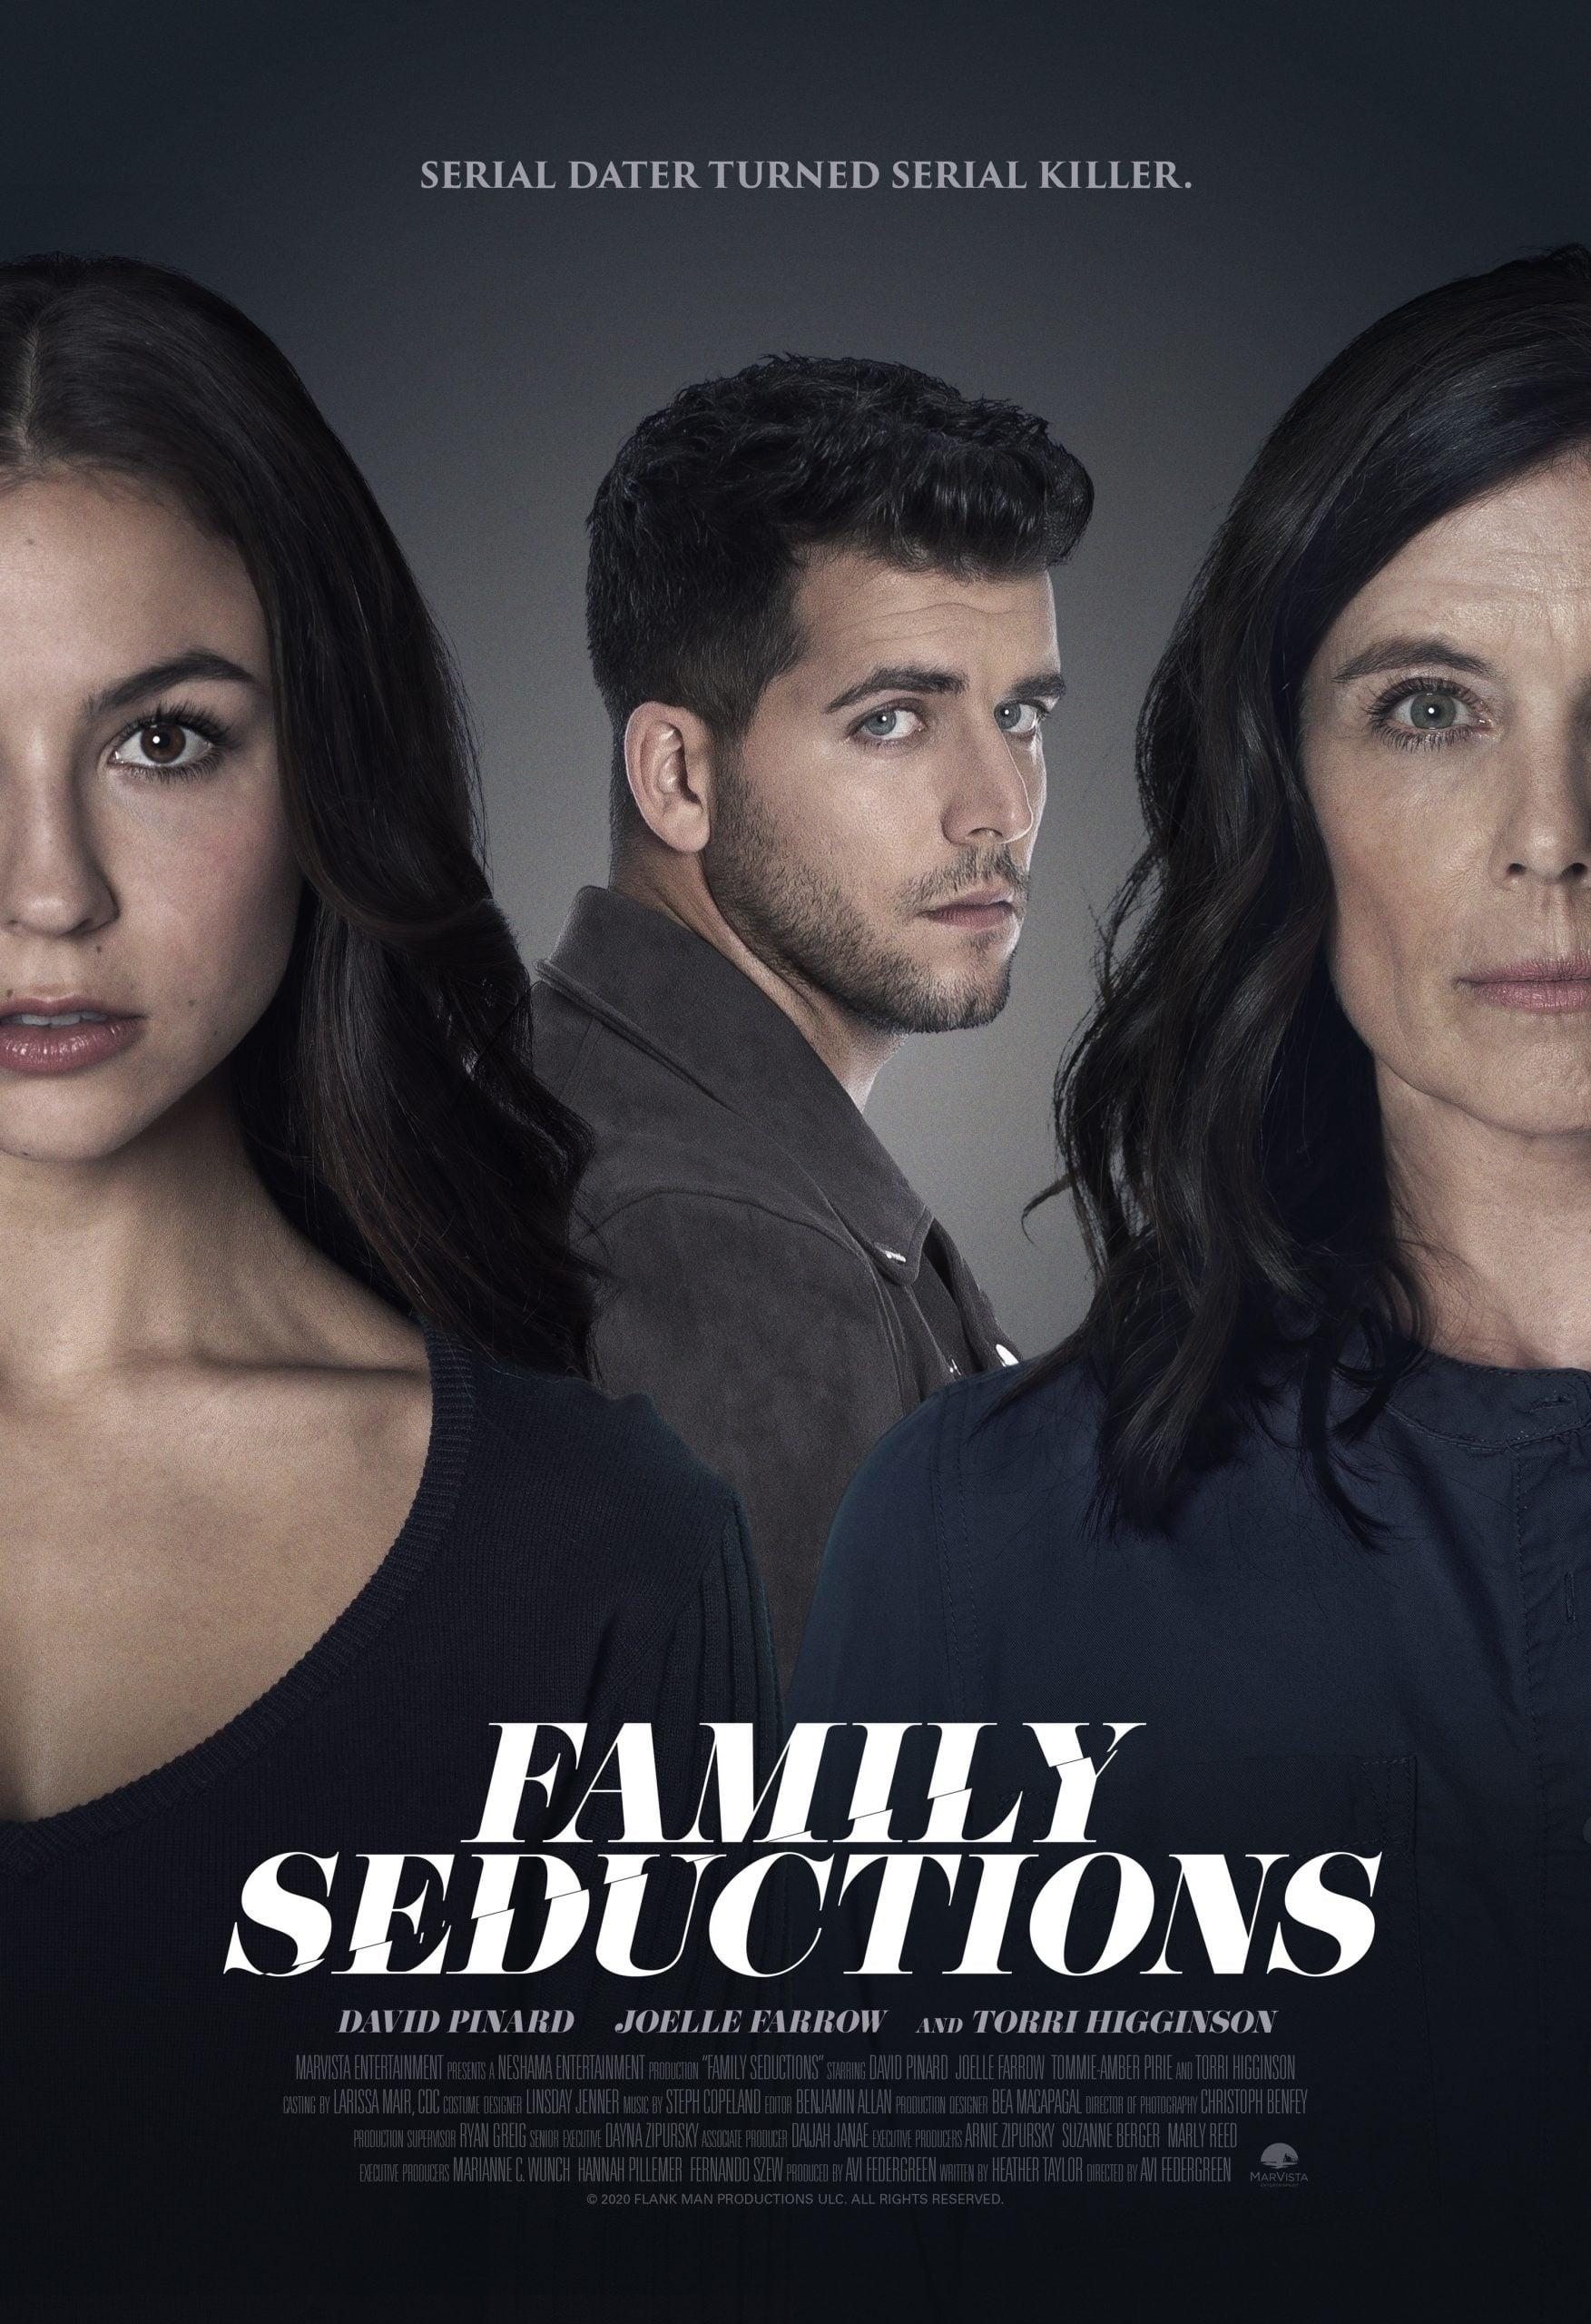 Family Seductions poster